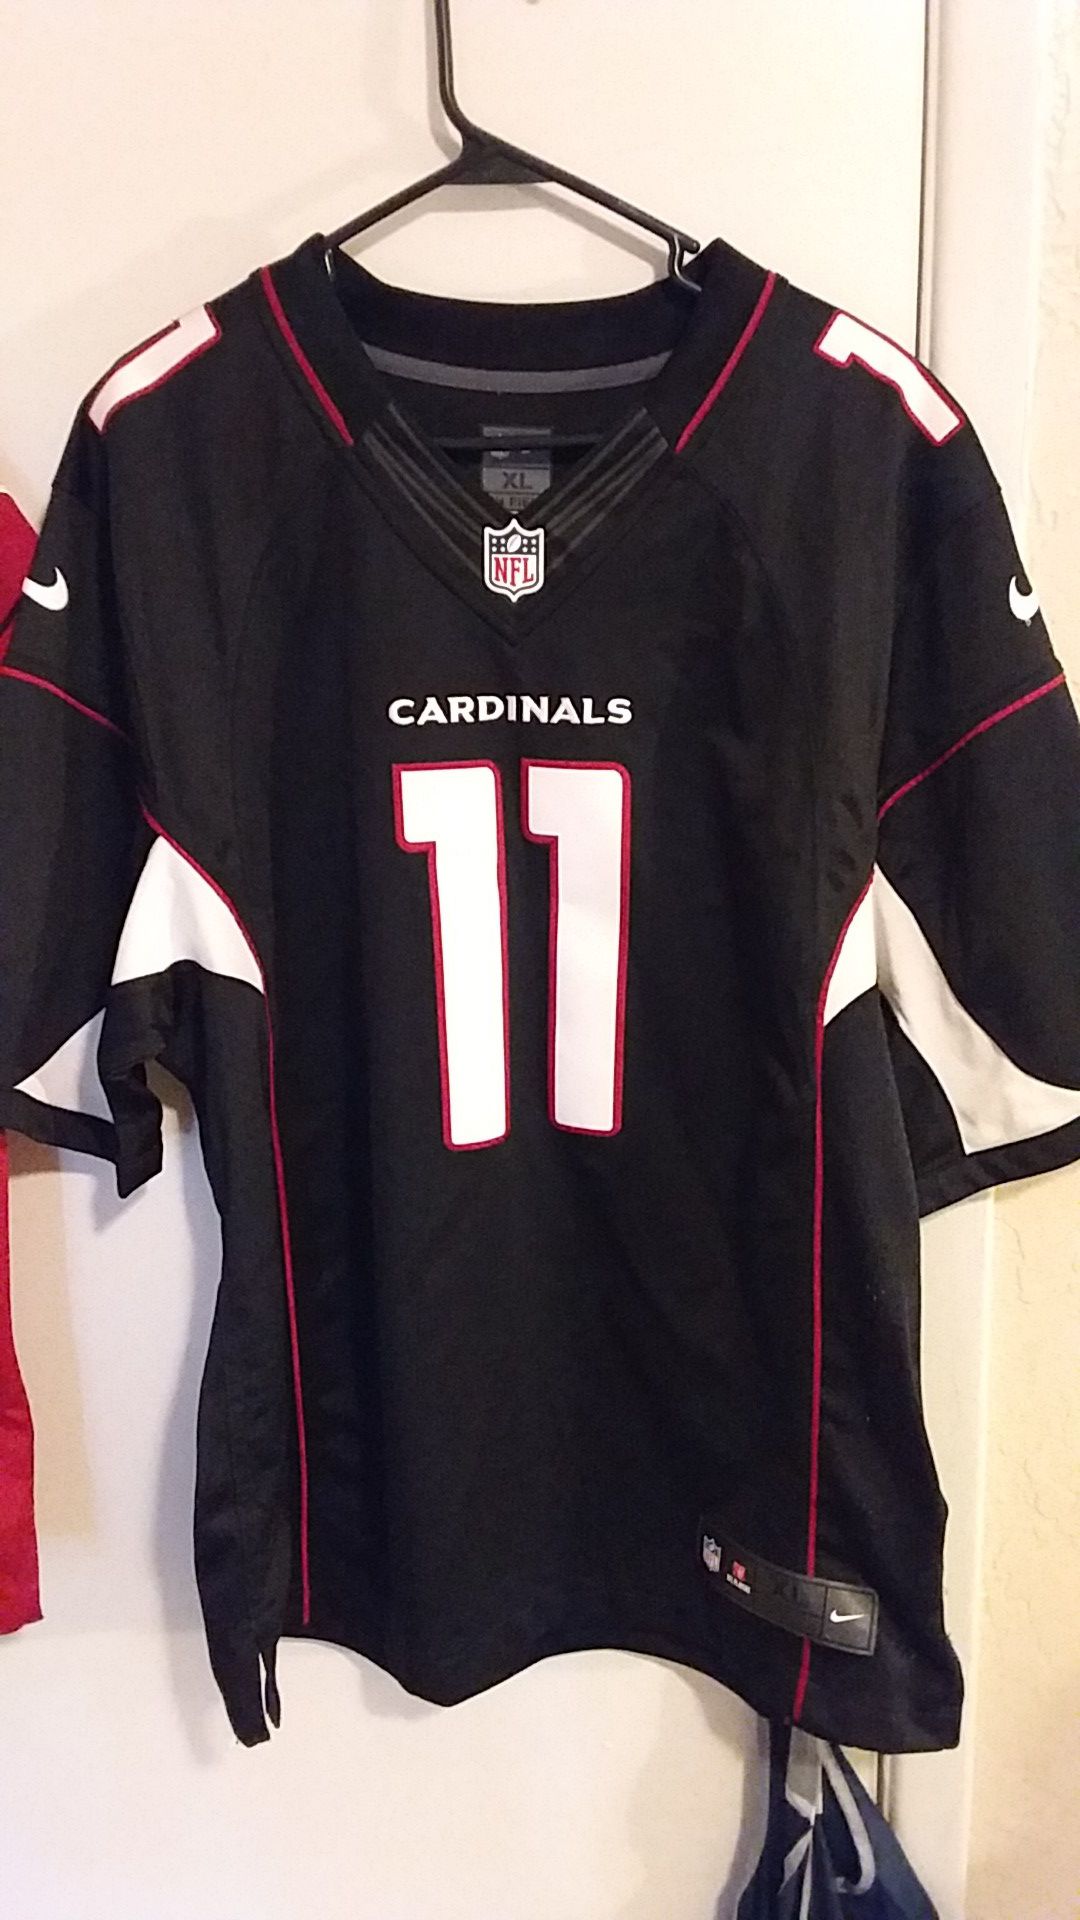 Authentic Cardinals Jerseys used once!